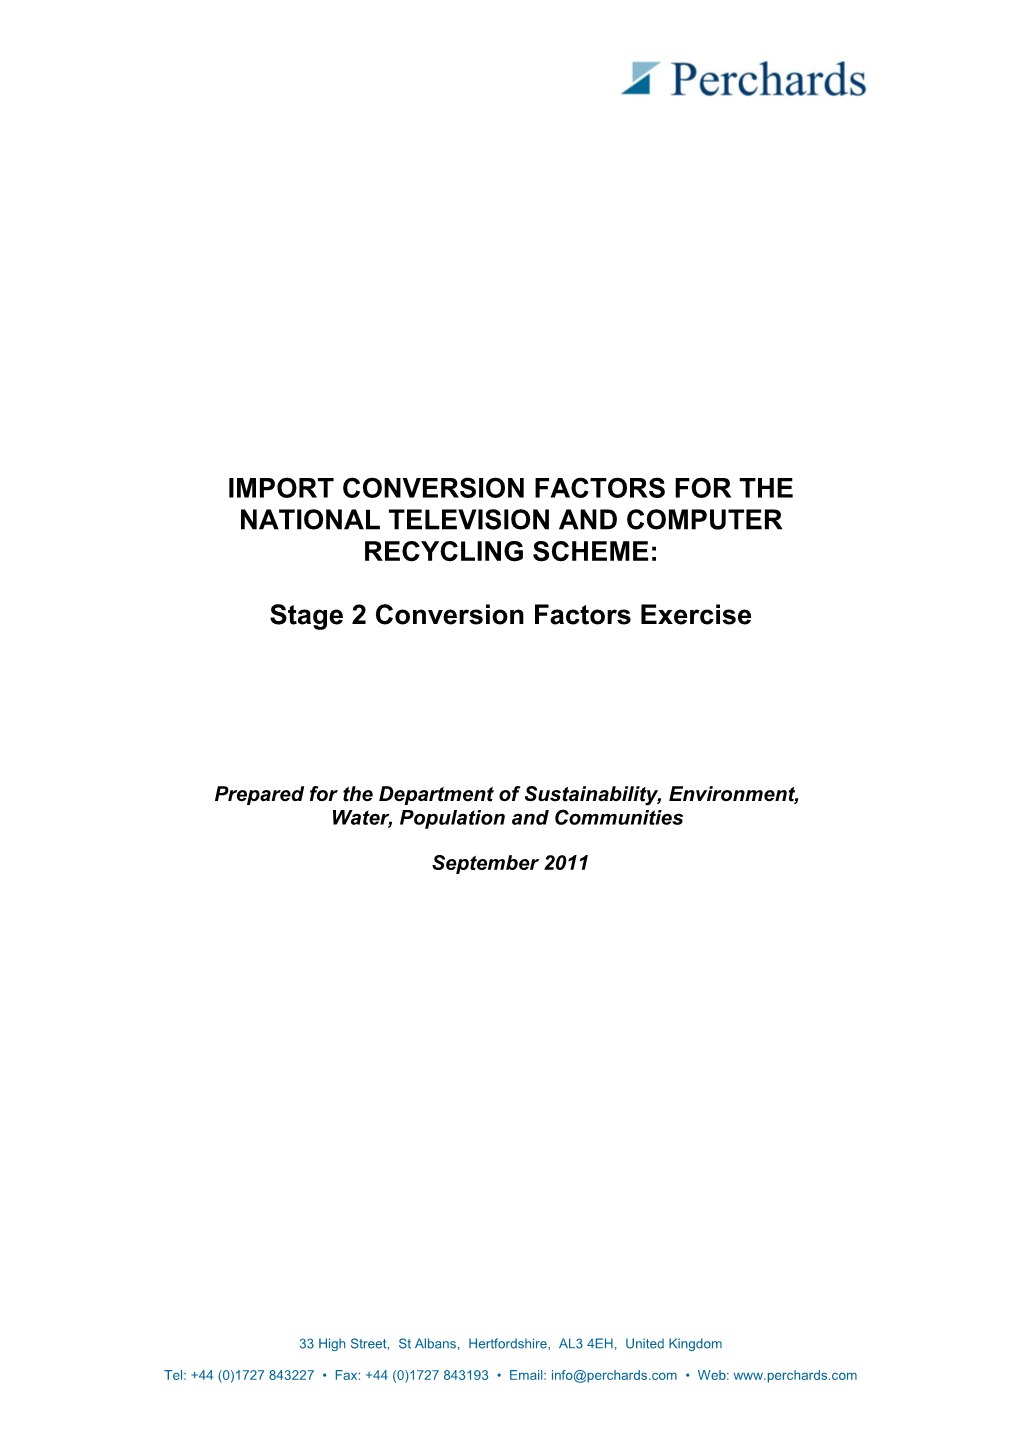 Import Conversion Factors for the National Television and Computer Recycling Scheme